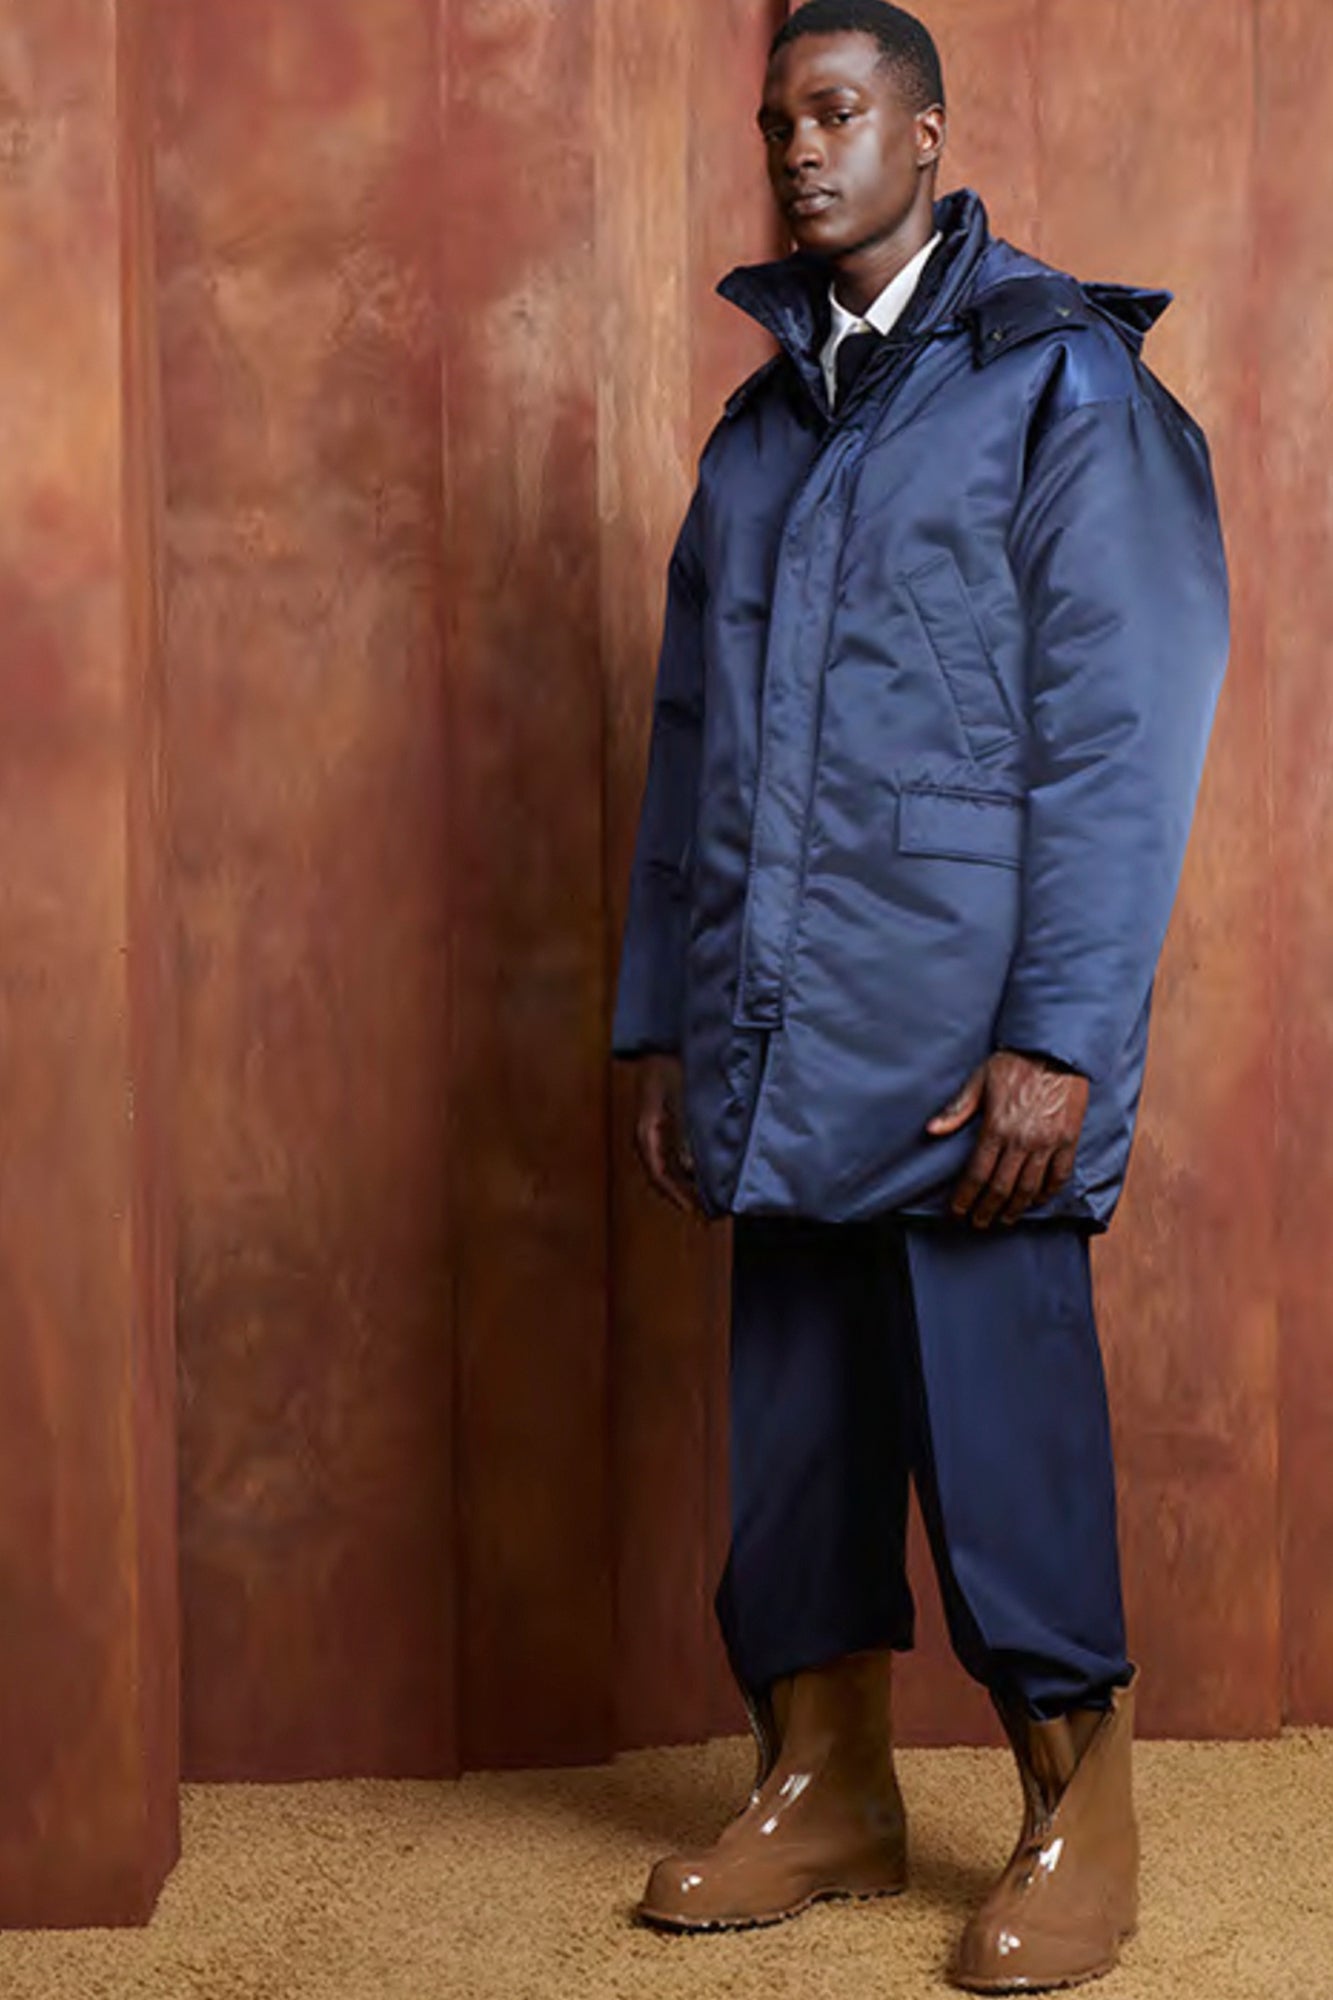 LIMITED EDITION: TRAVIS NAVY PUFFER COAT - MENS - Cardinal of Canada-CA - TRAVIS NAVY PUFFER COAT 38 inch length